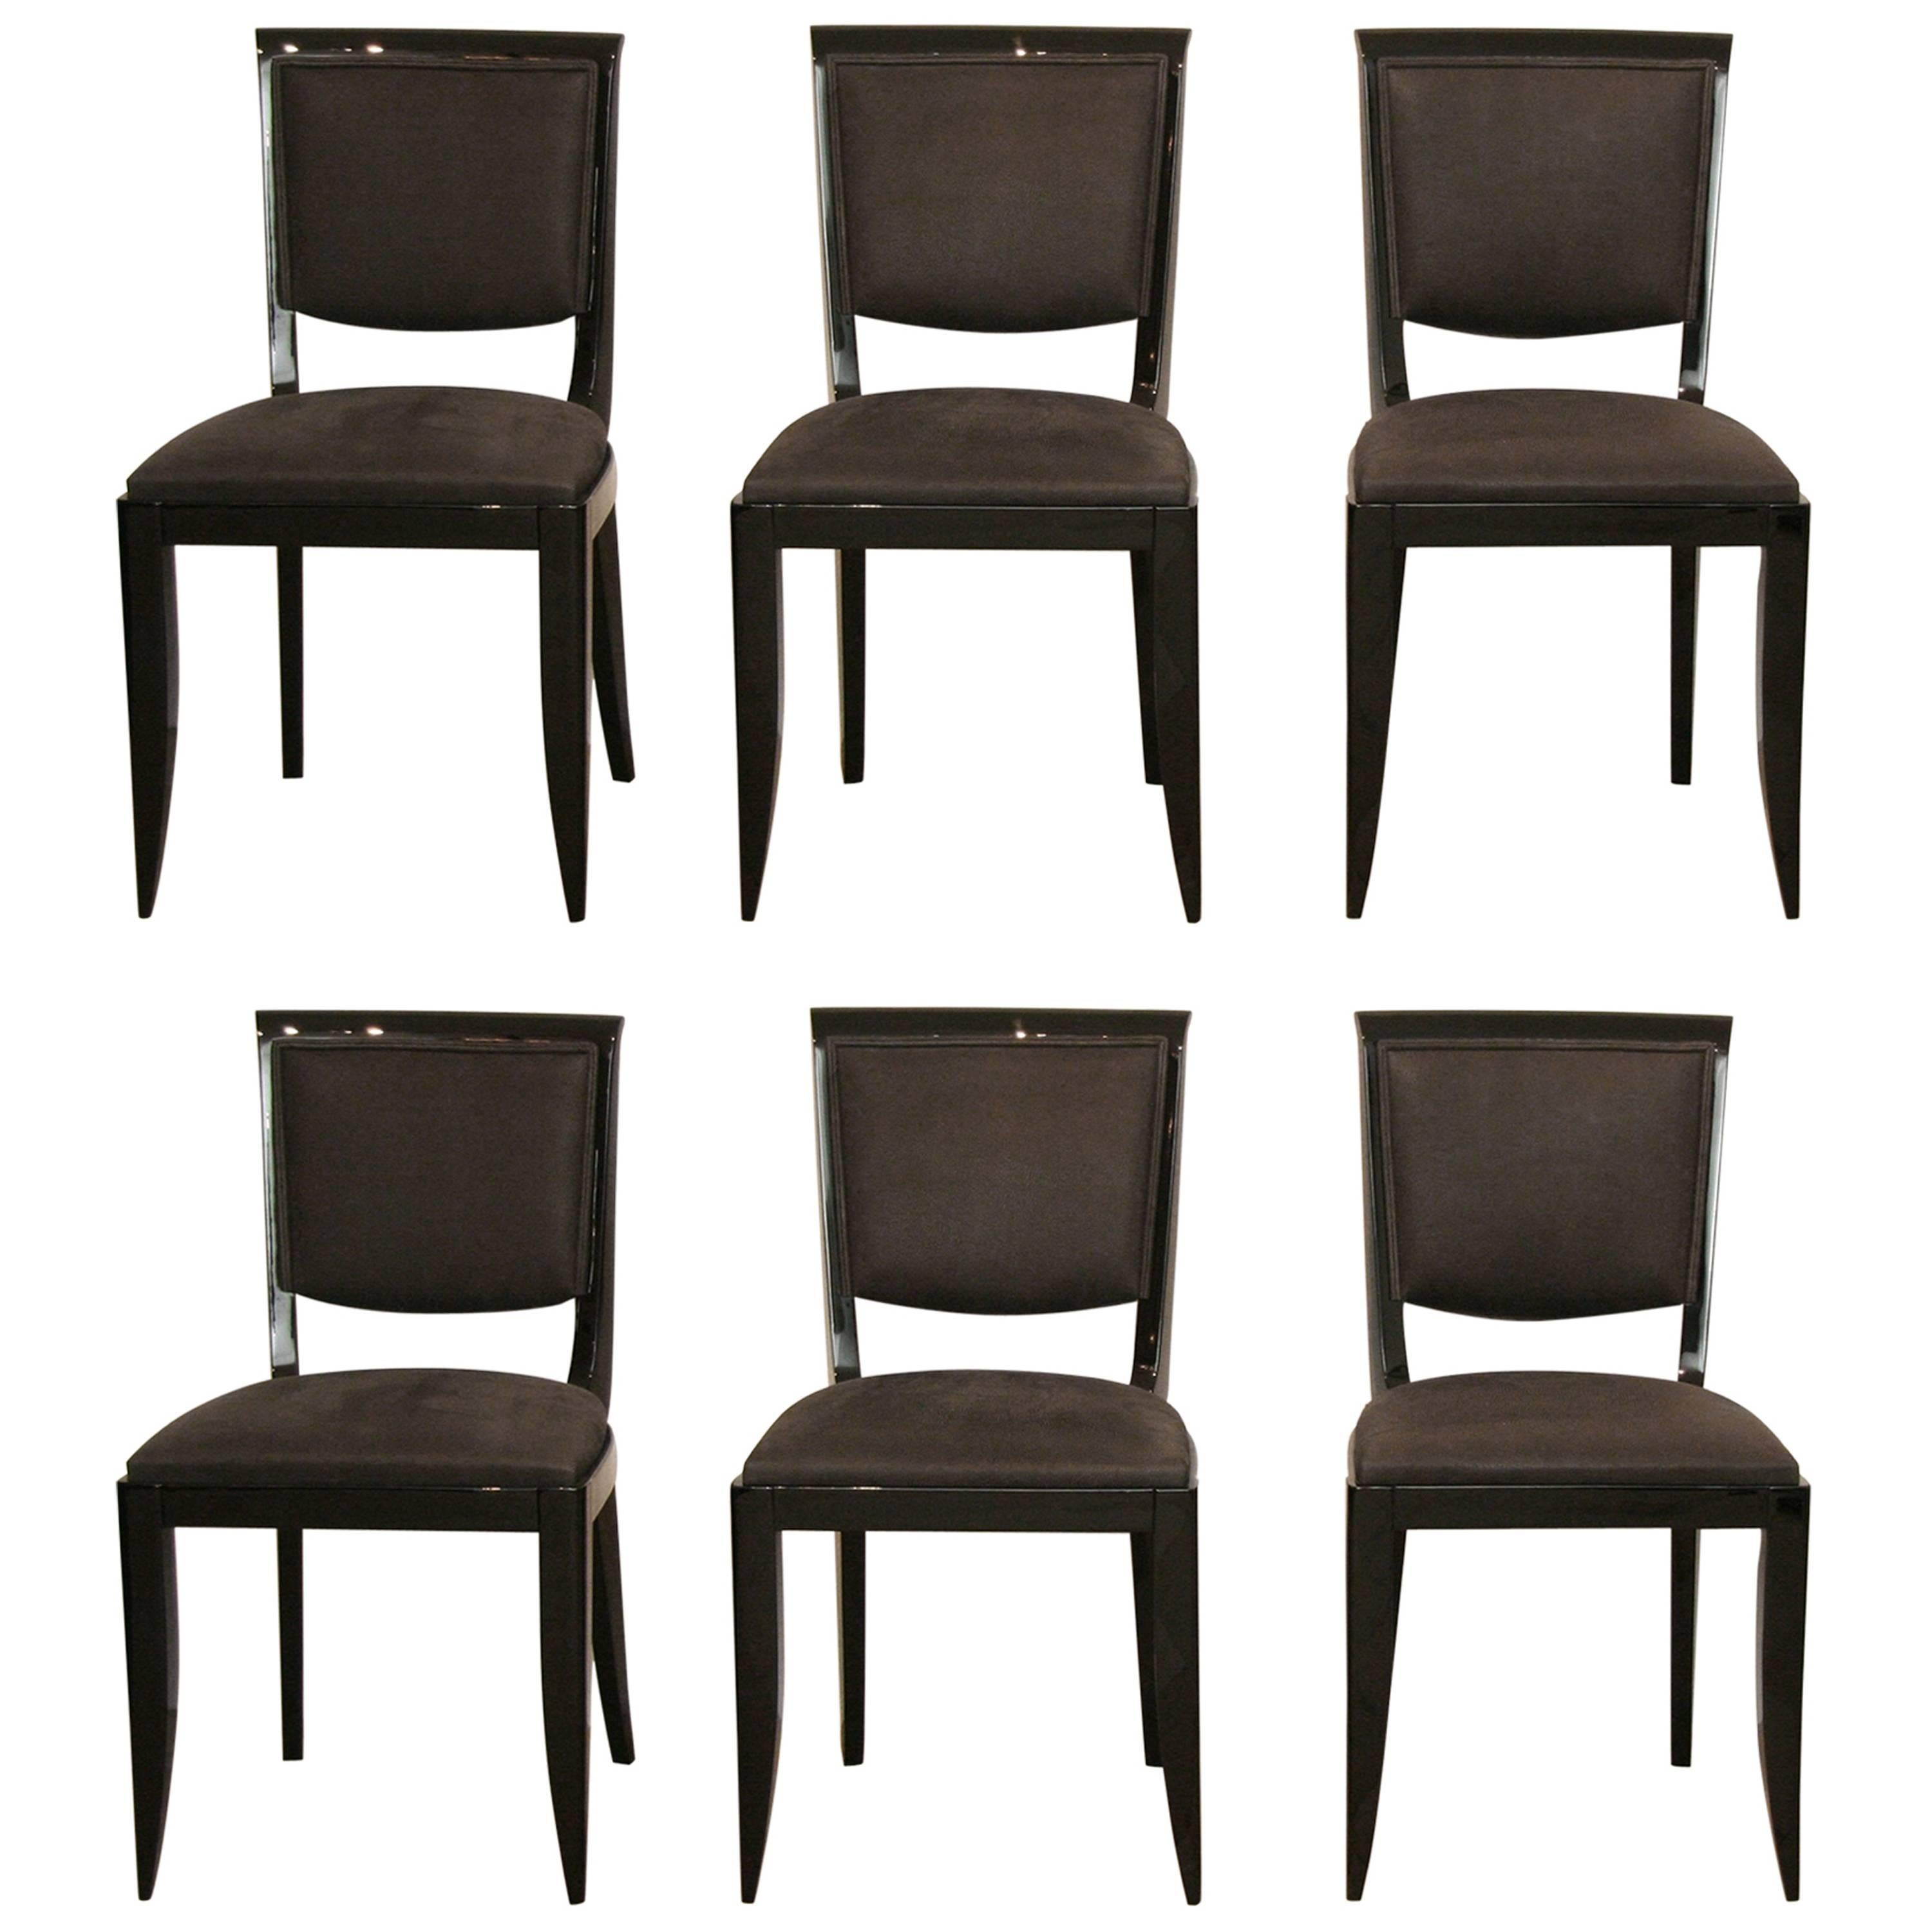 Six Black French Art Deco Dining Room Chairs Re-Lacquered and Re-Upholstered